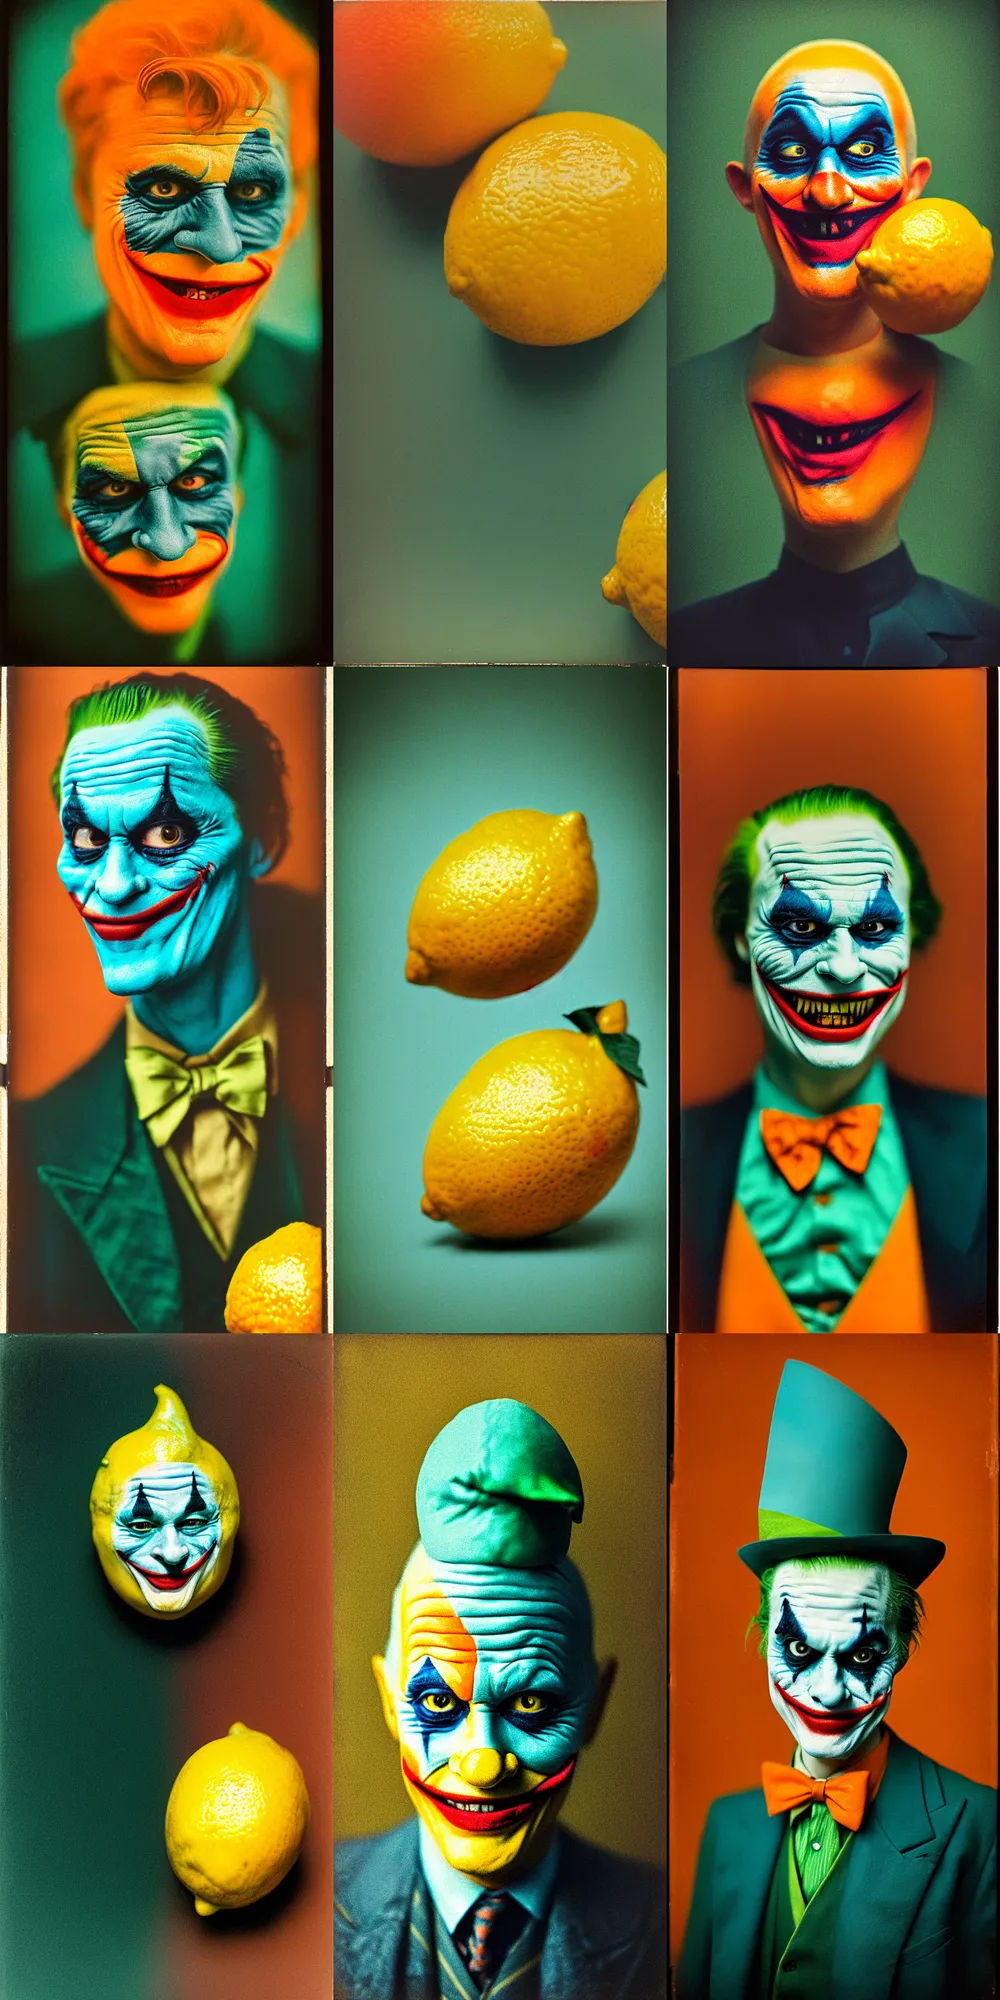 Prompt: kodak portra 4 0 0, wetplate, 8 k, shot of a highly detailed, britt marling style, colour still - life portrait of a lemon looks like 1 9 9 9 joker, motion blur, teal and orange, muted coloures